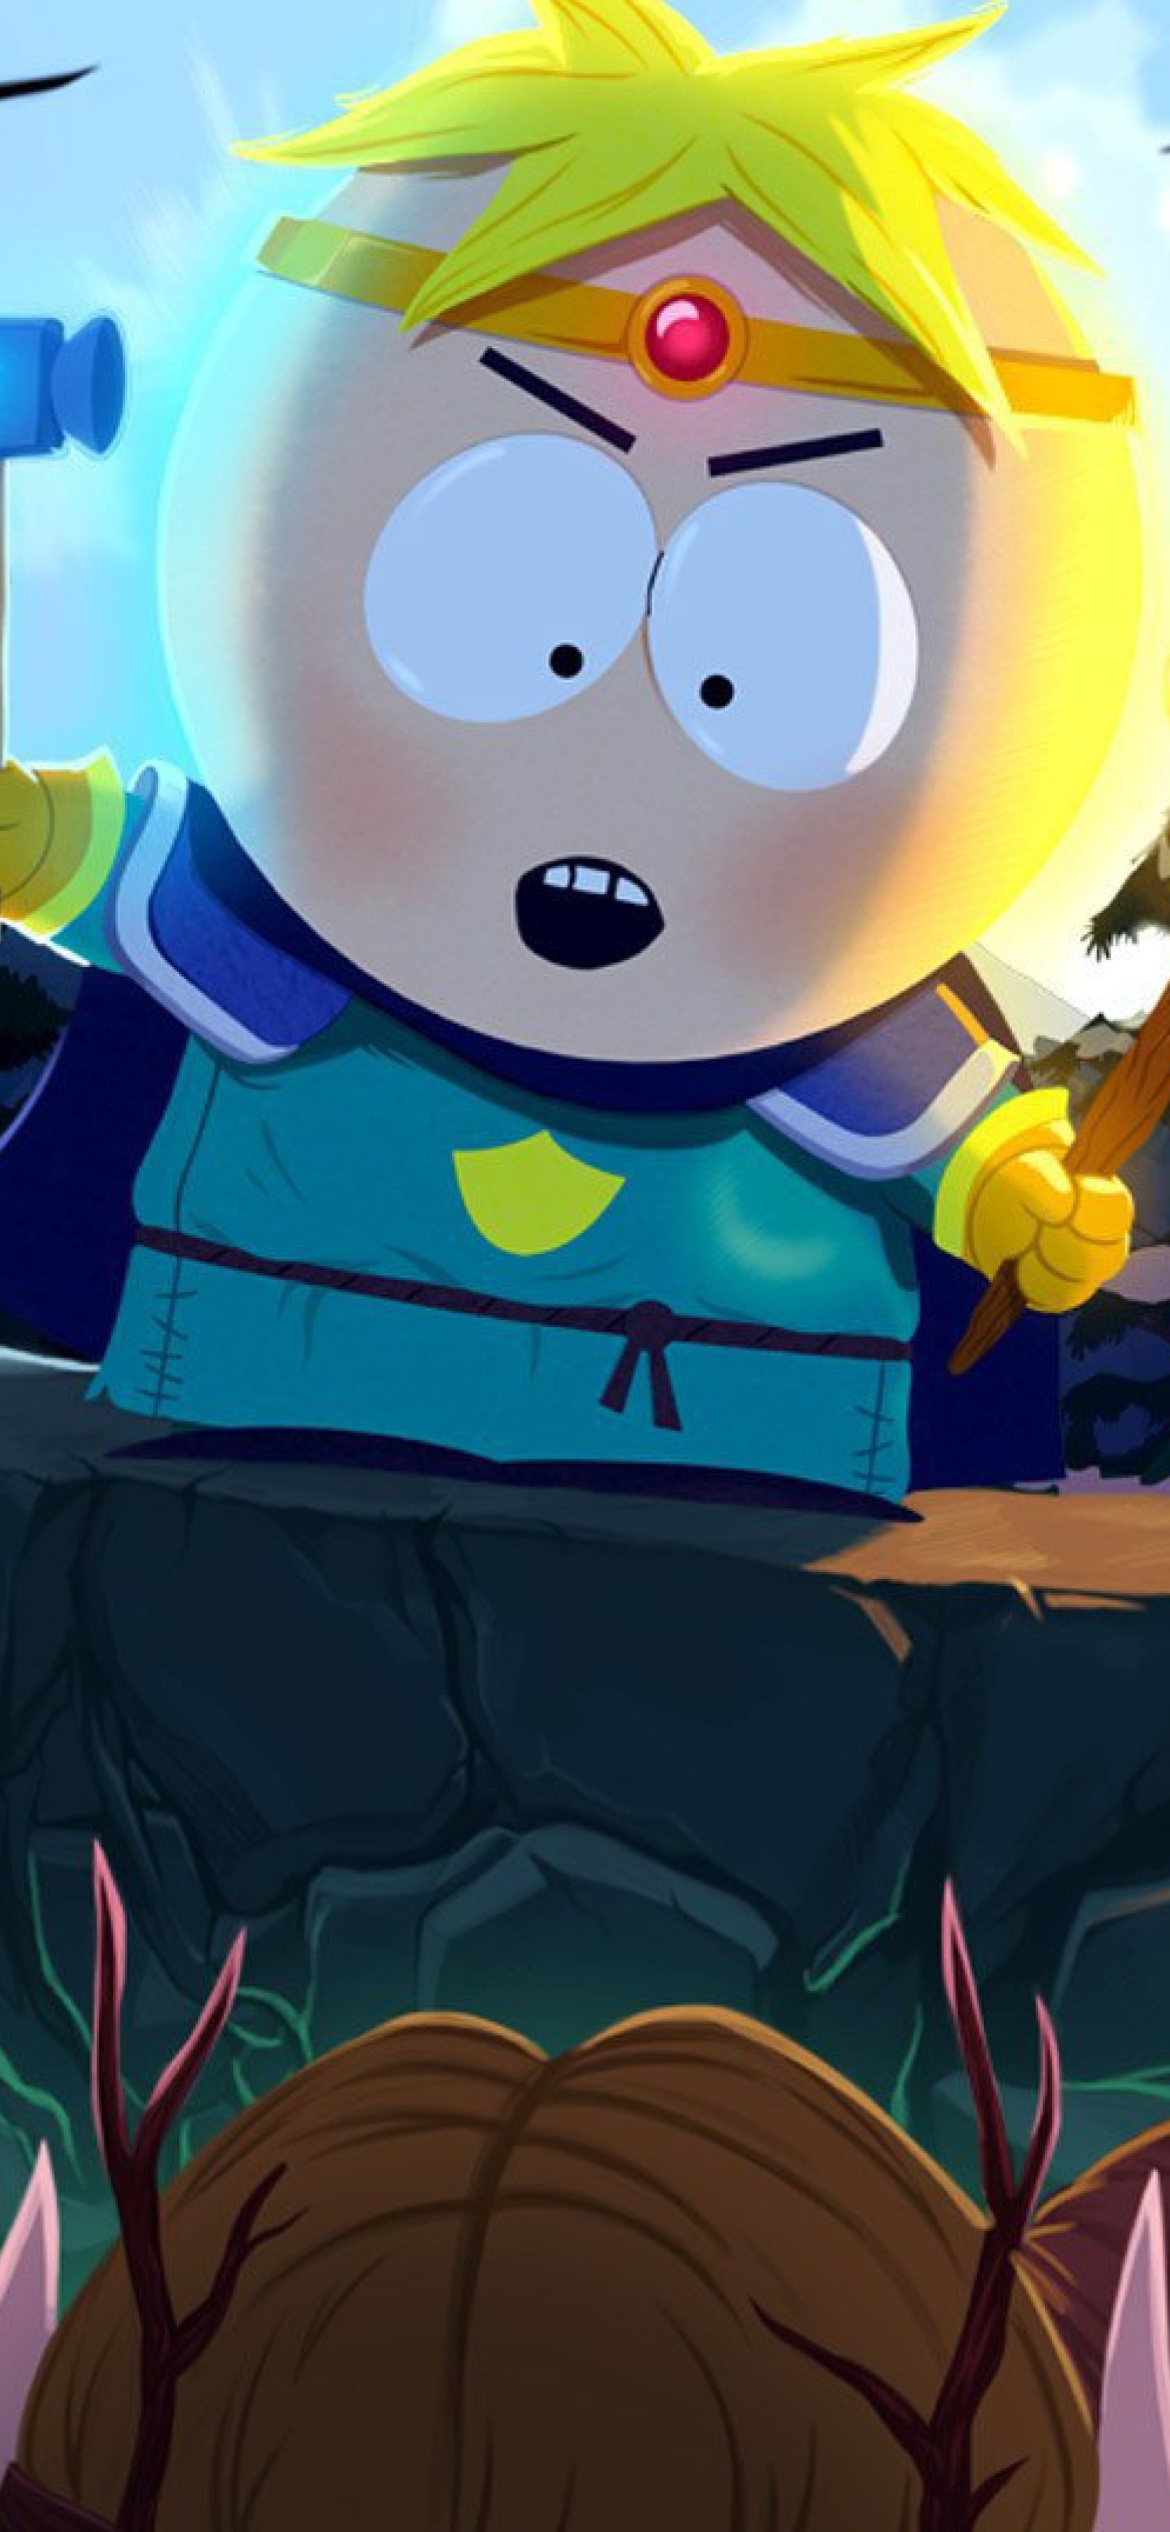 South Park The Stick Of Truth wallpaper 1170x2532